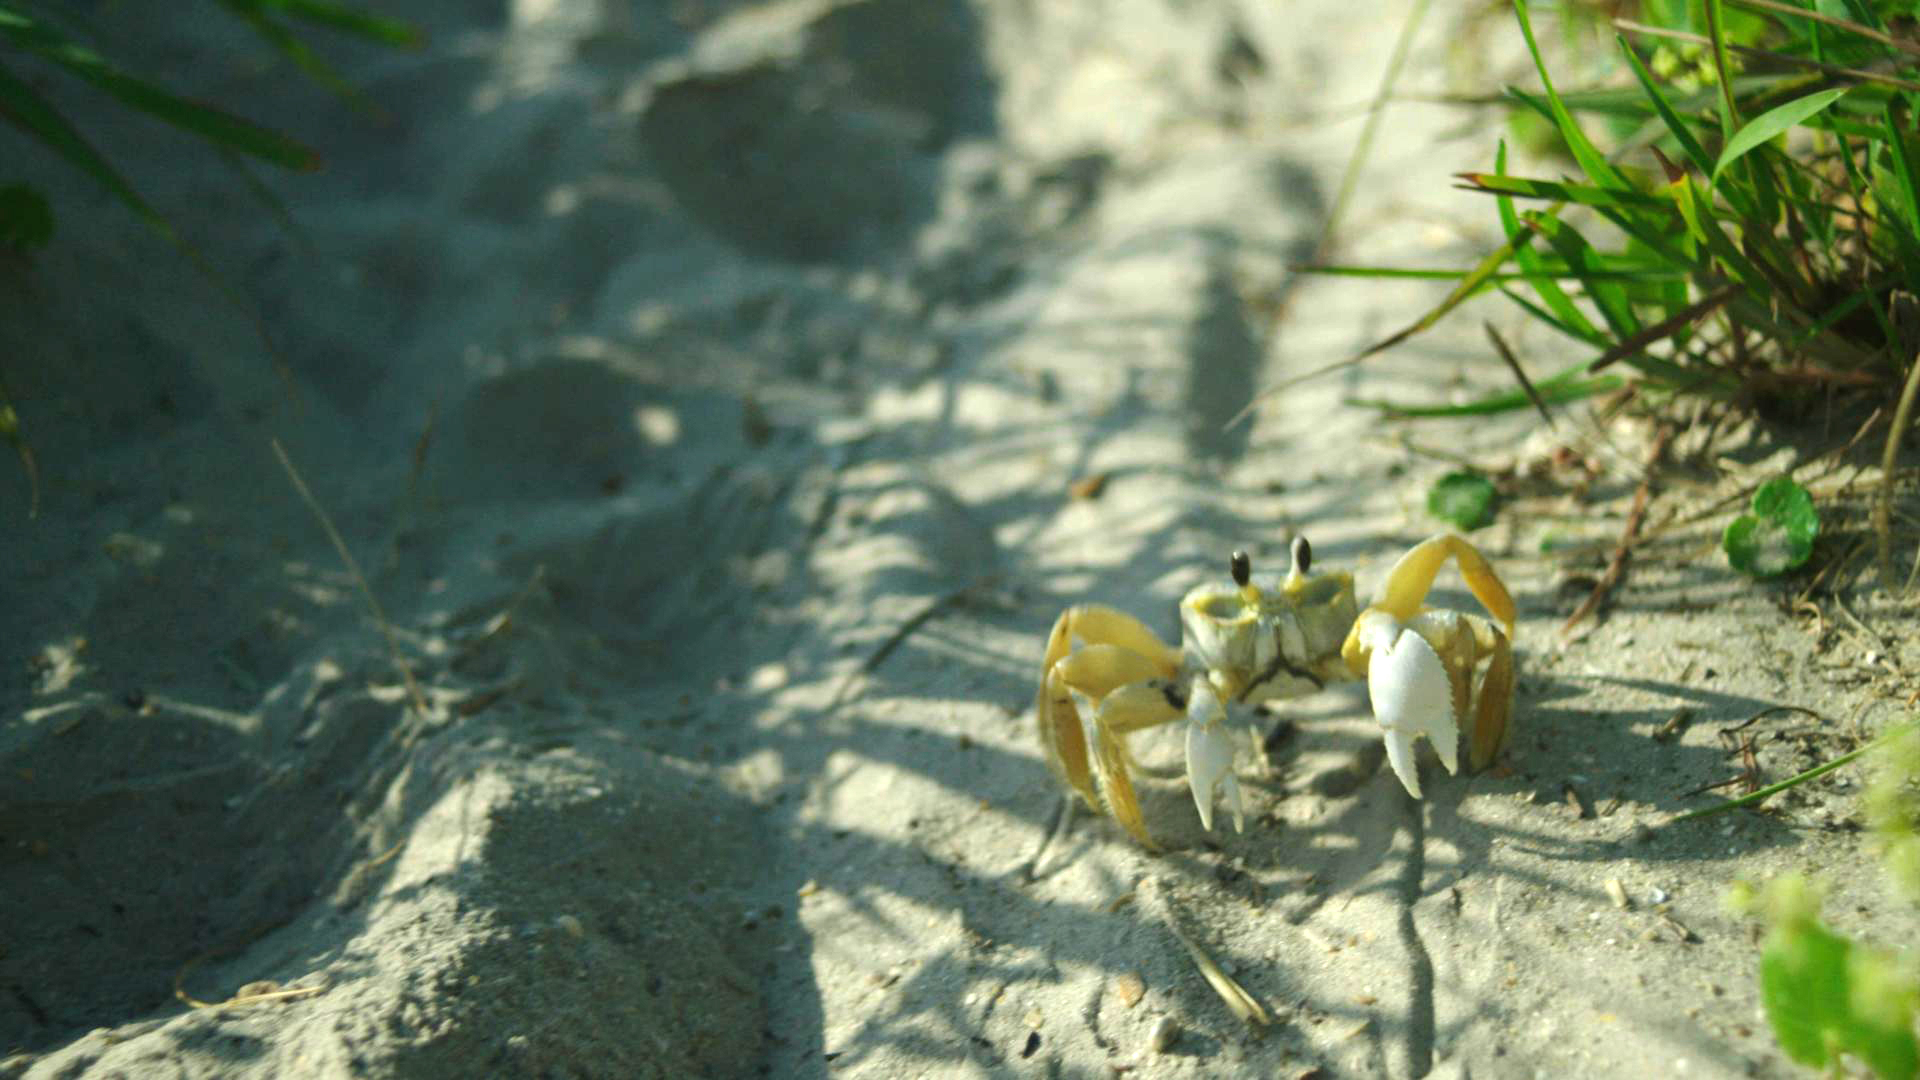 A crab poses for a cameo on the beach. This is from Something bit me! [Photo of the day - April 2022]